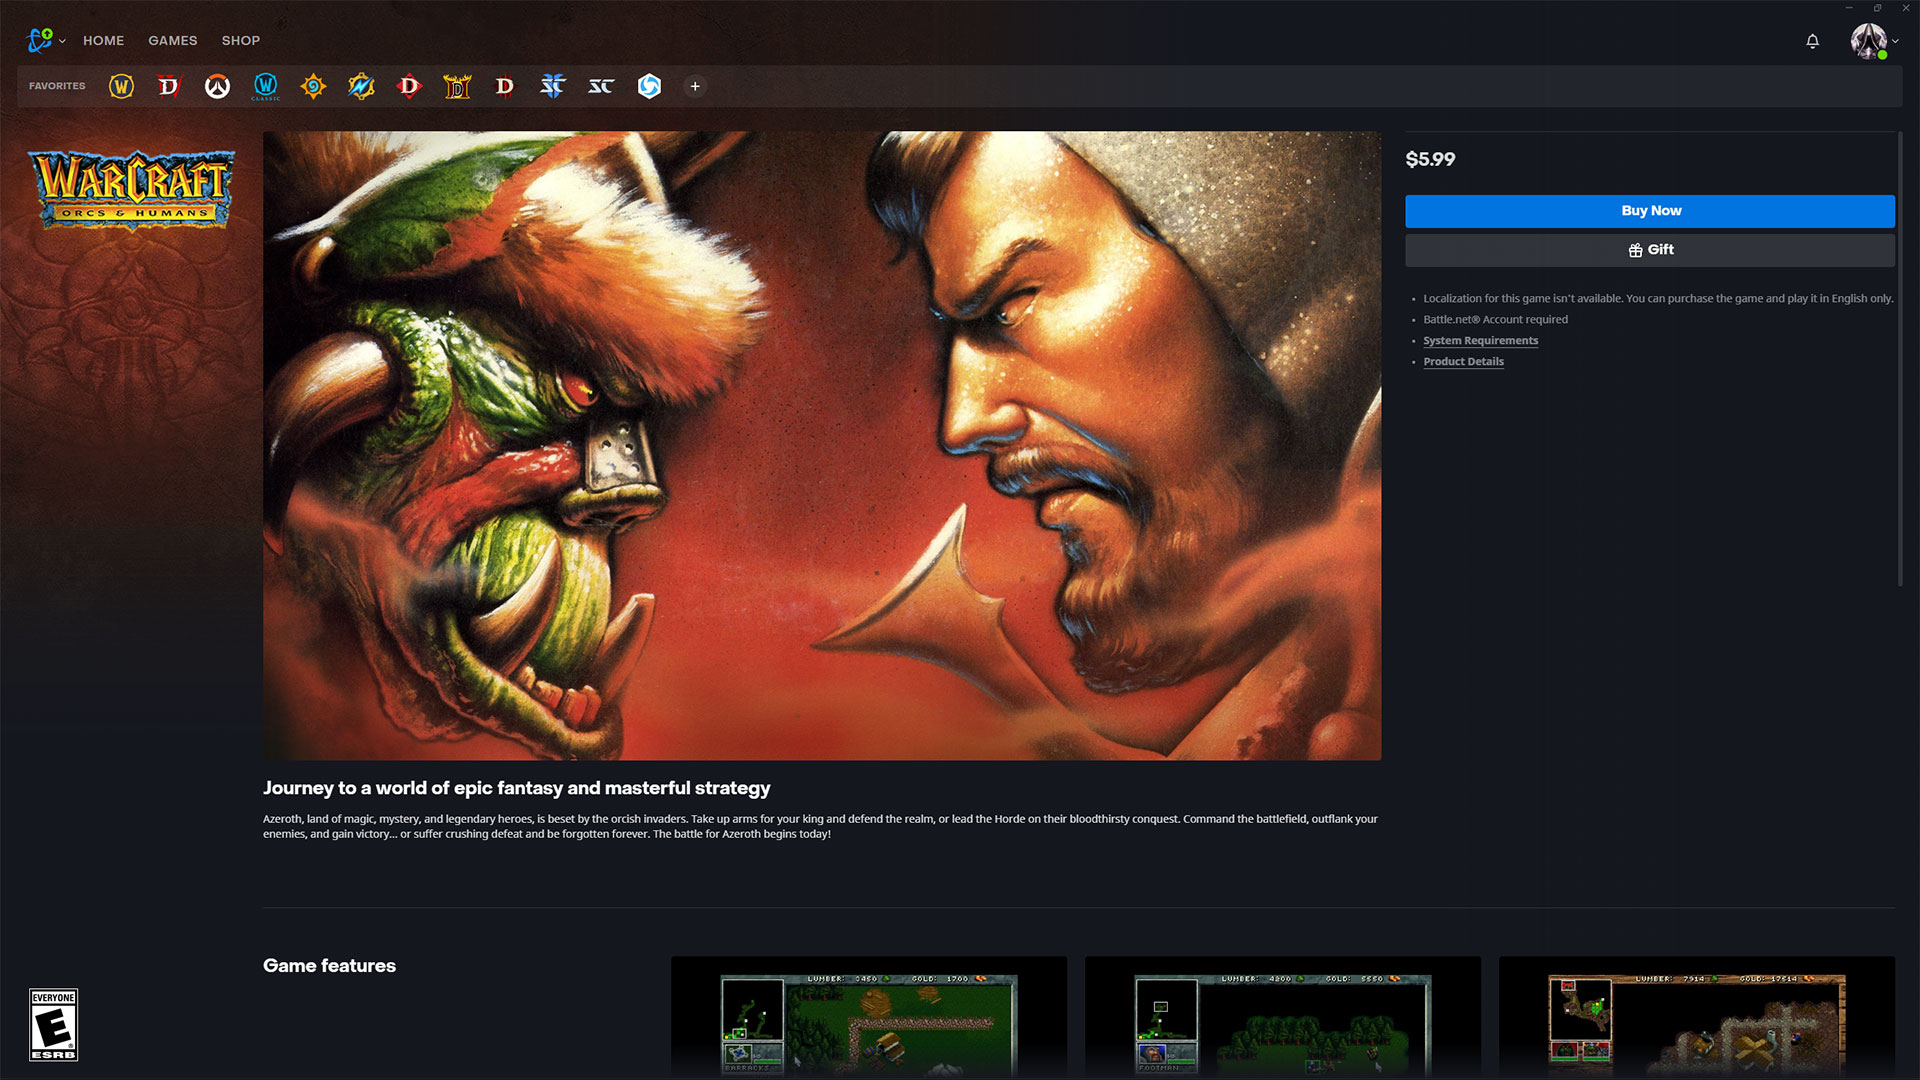 Warcraft: Orcs & Humans, Warcraft II: Tides of Darkness, and the original Diablo are now available on Battle.net